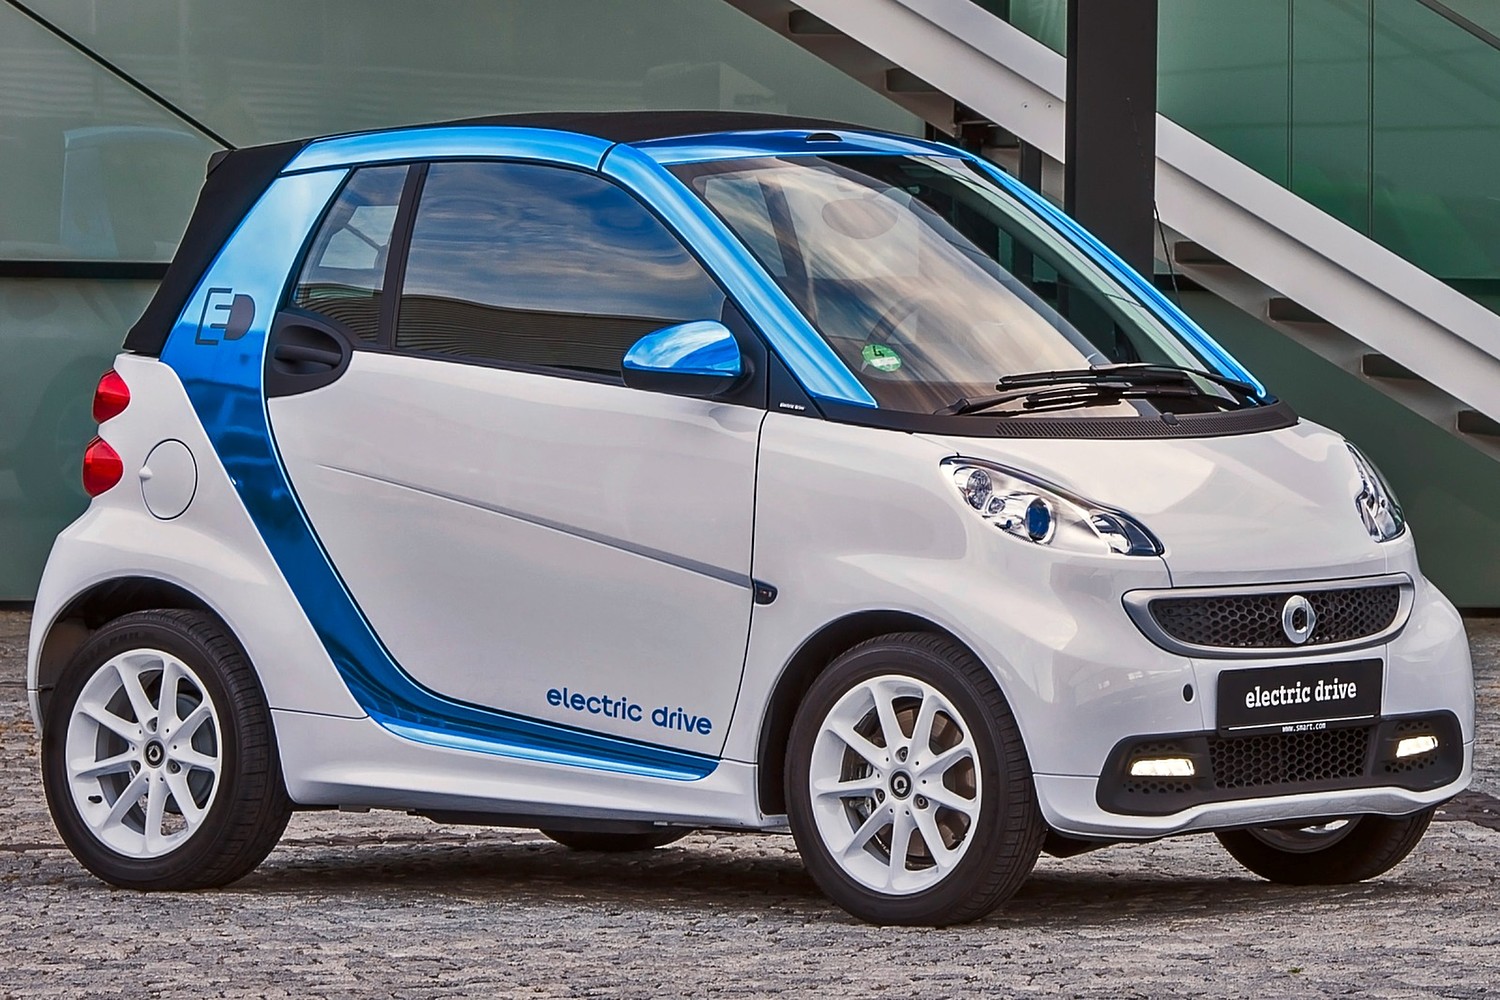 smart fortwo electric drive 2dr Hatchback Exterior (2013 model year shown)